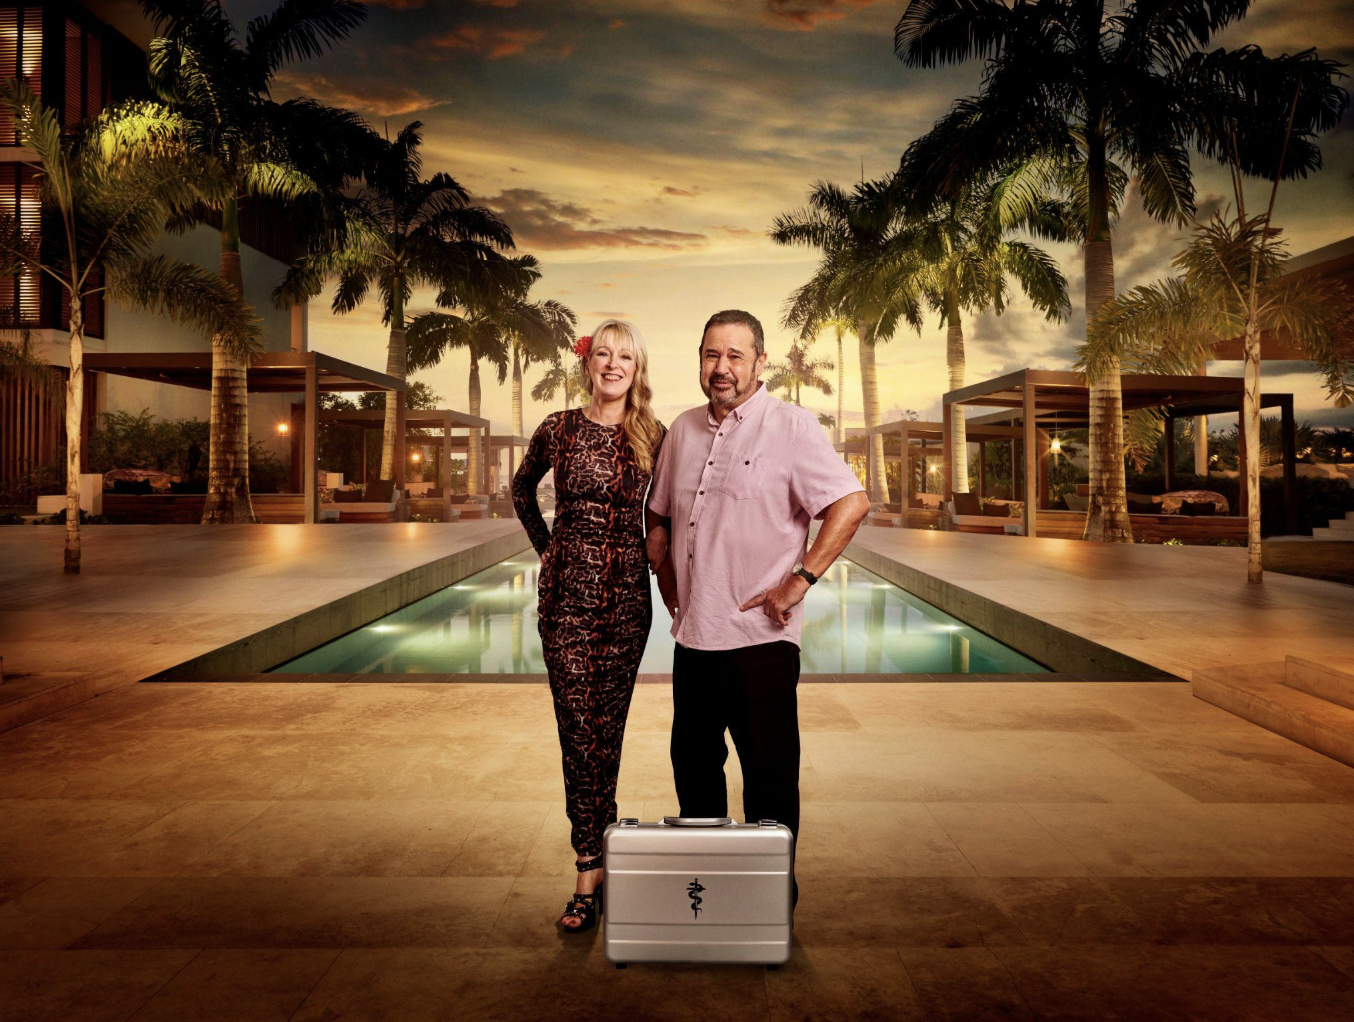 Interview with Gary and Lesley (partners), from ITV's 'The Fortune Hotel'